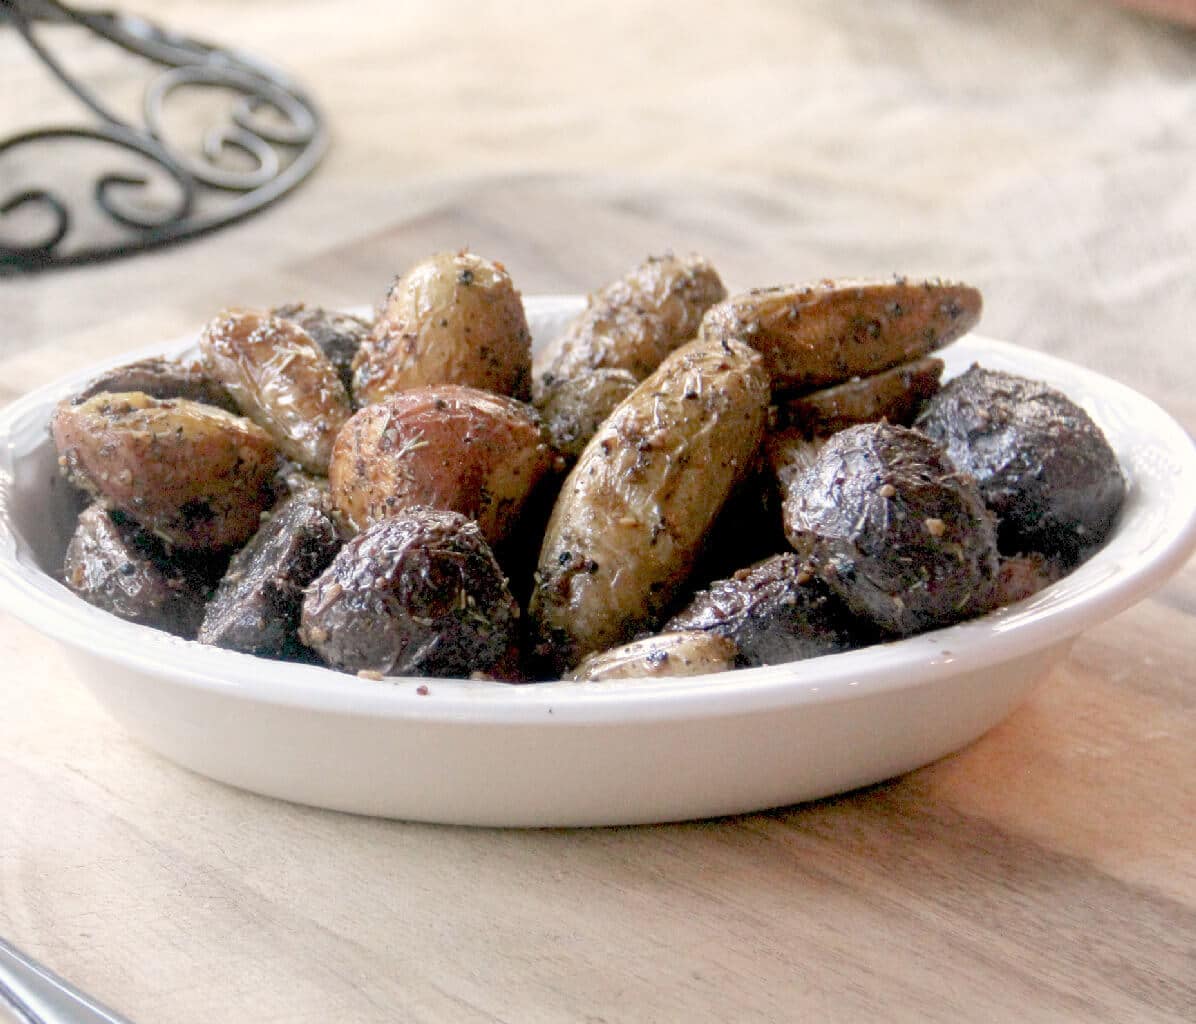 Roasted fingerling potatoes with garlic and Italian herbs are slightly crispy on the outside and soft on the inside and a choice accompaniment to almost any meal.